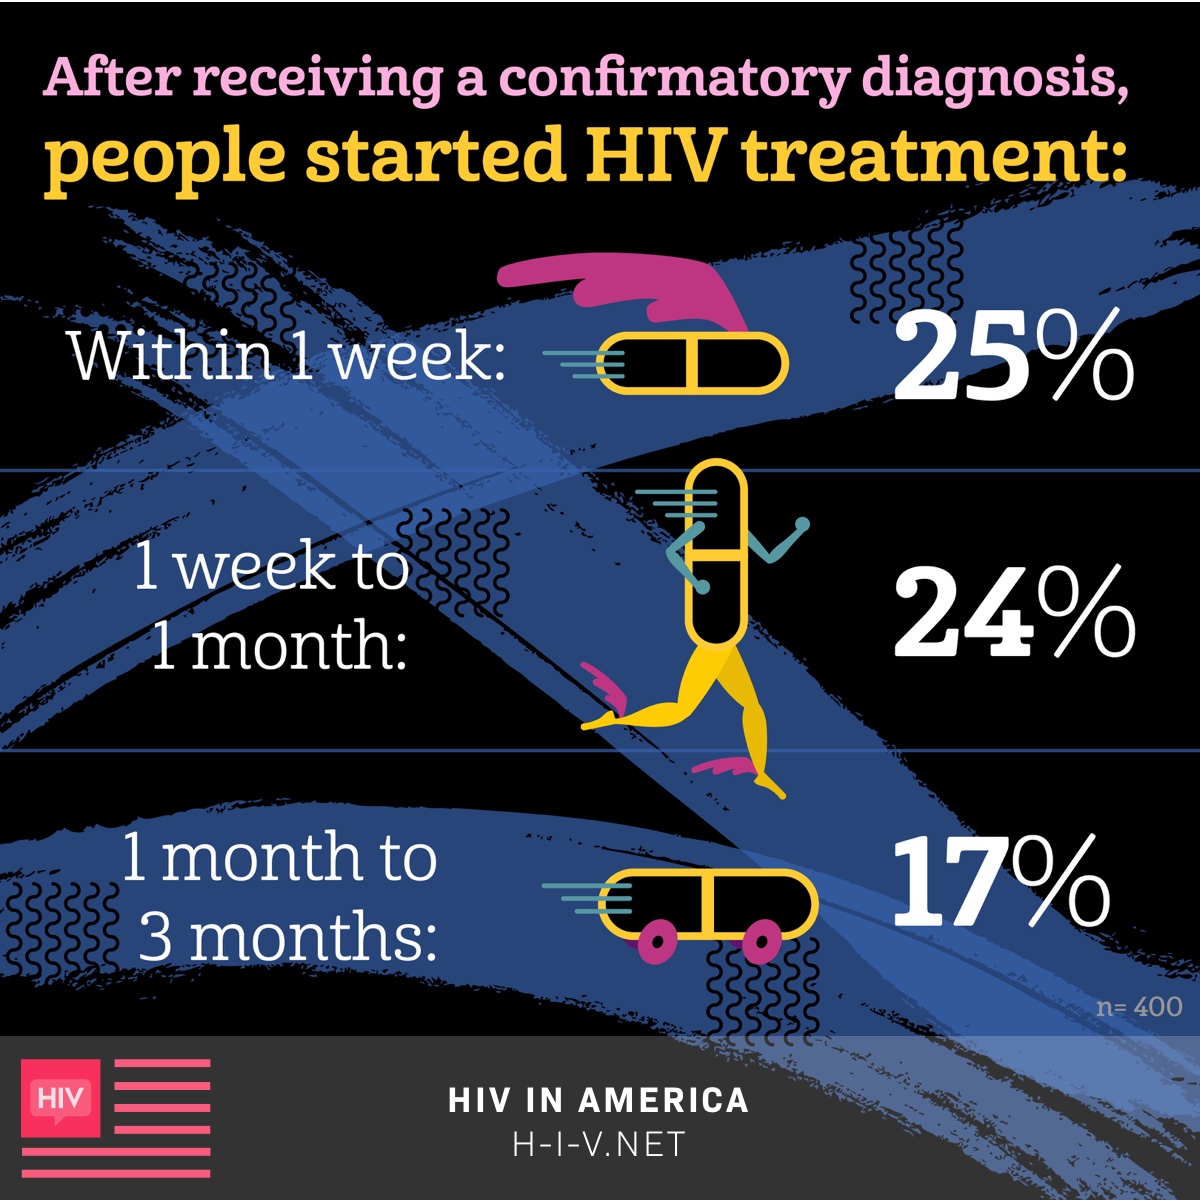 An infographic shows that after diagnosis, 25% of people start HIV treatment within 1 week,  24% start after 1 week to a month, and 17% start 1 to 3 months.